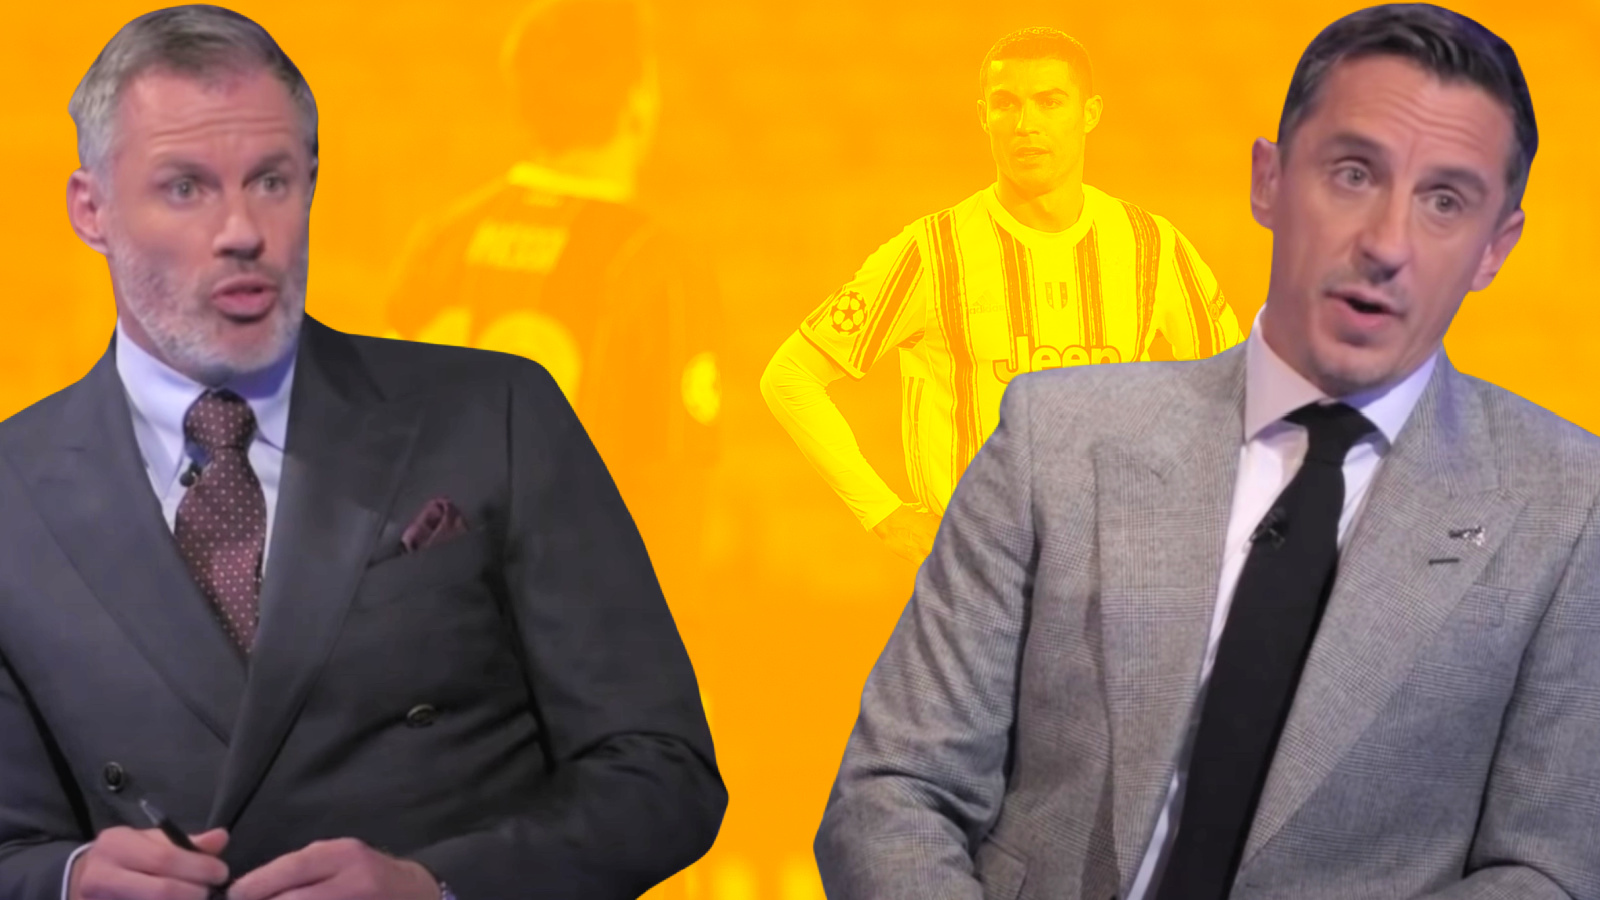 Gary Neville tries to say Ronaldo is greater than Messi but gets roasted by Jamie Carragher